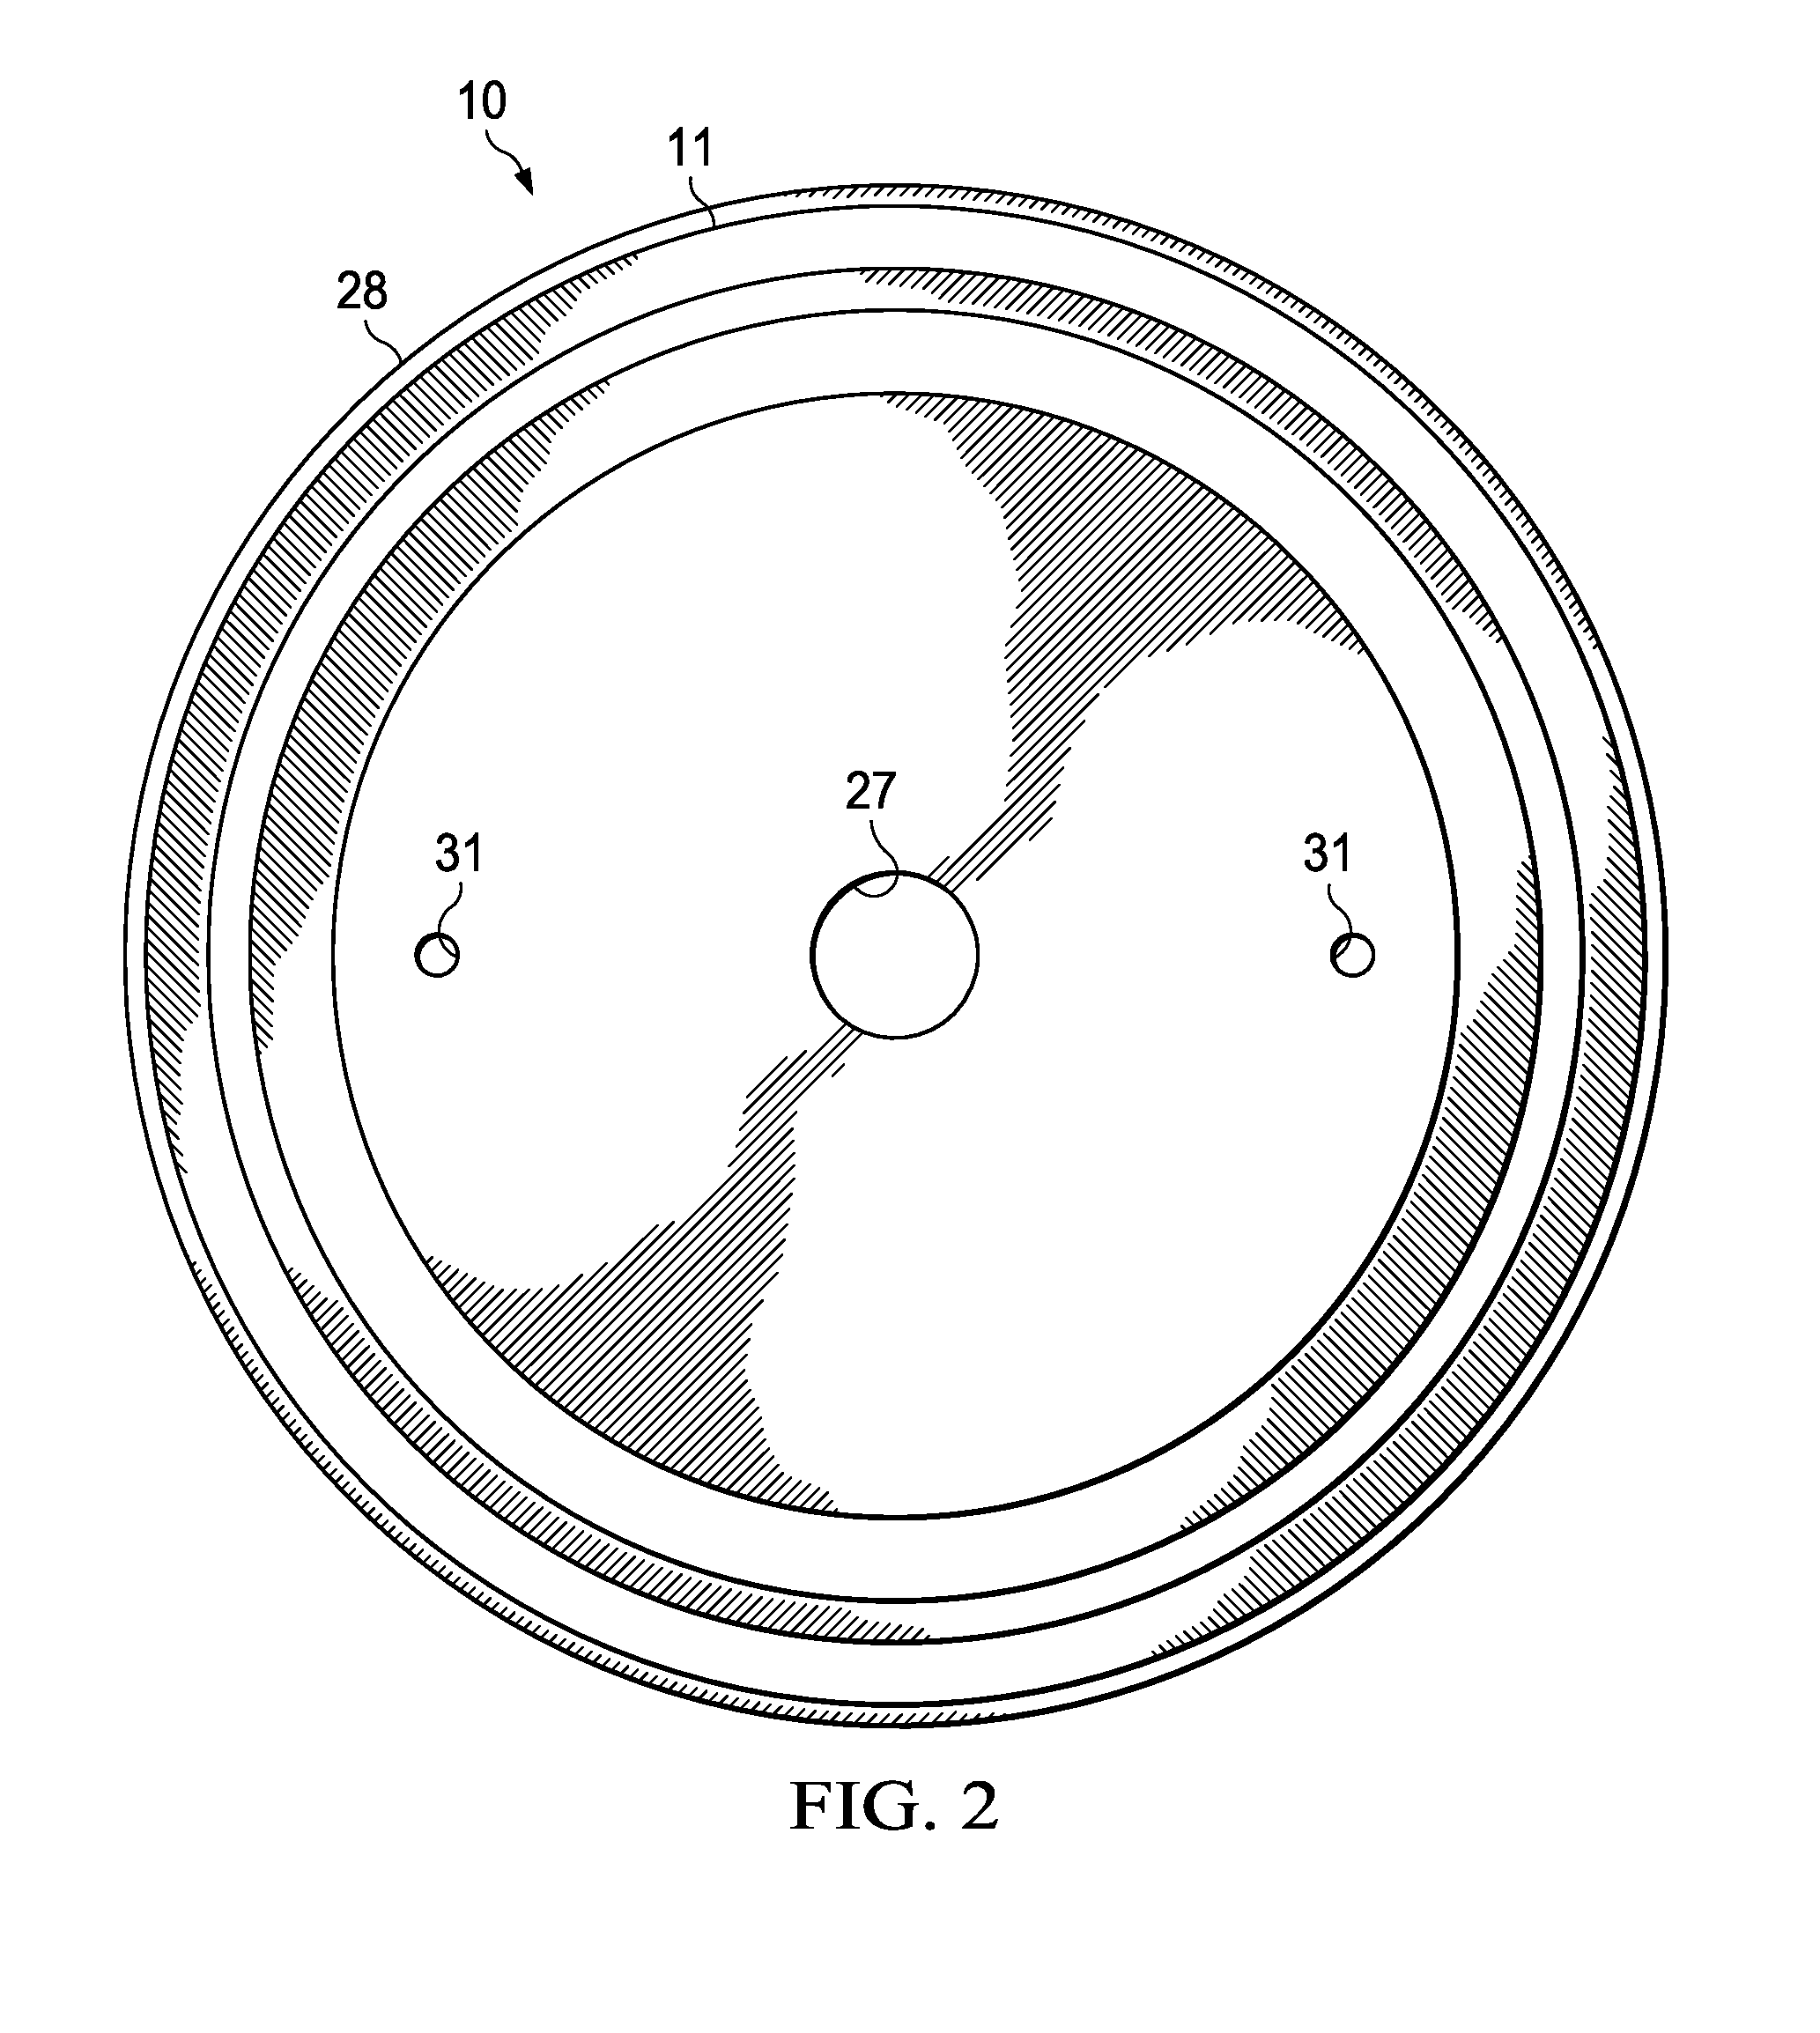 Systems and methods for supplying reduced pressure using a disc pump with electrostatic actuation